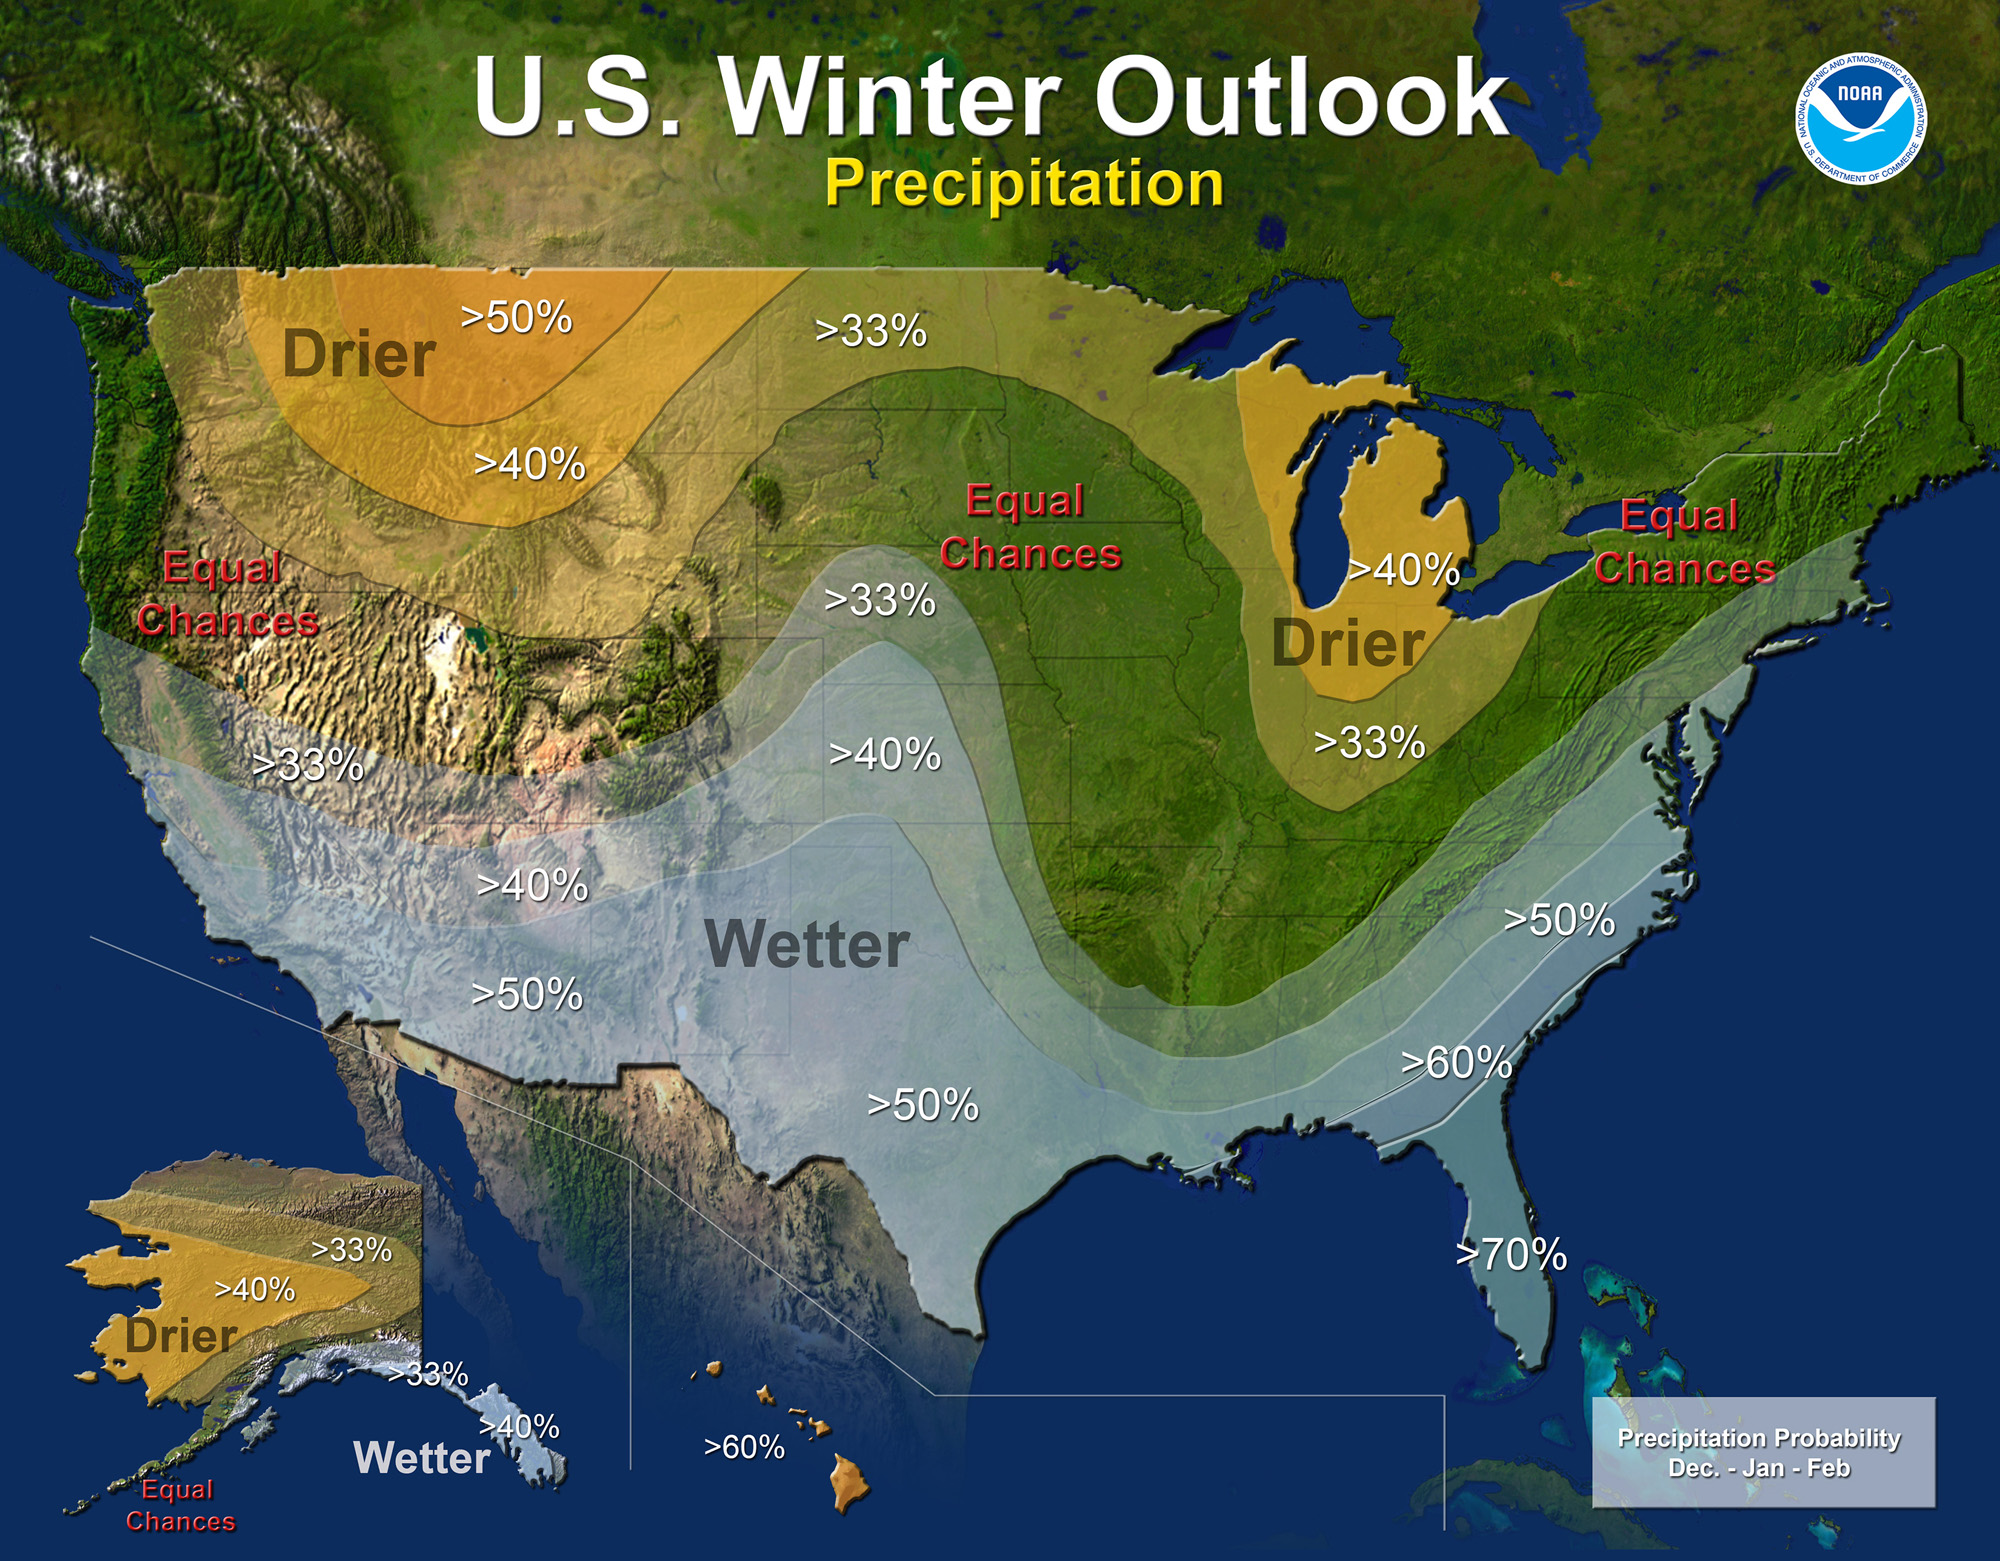 NOAA's official El Nino/Winter outlook for the USA shows a 33% chance or higher of above average precipitation in the Sierra Nevada, CA.